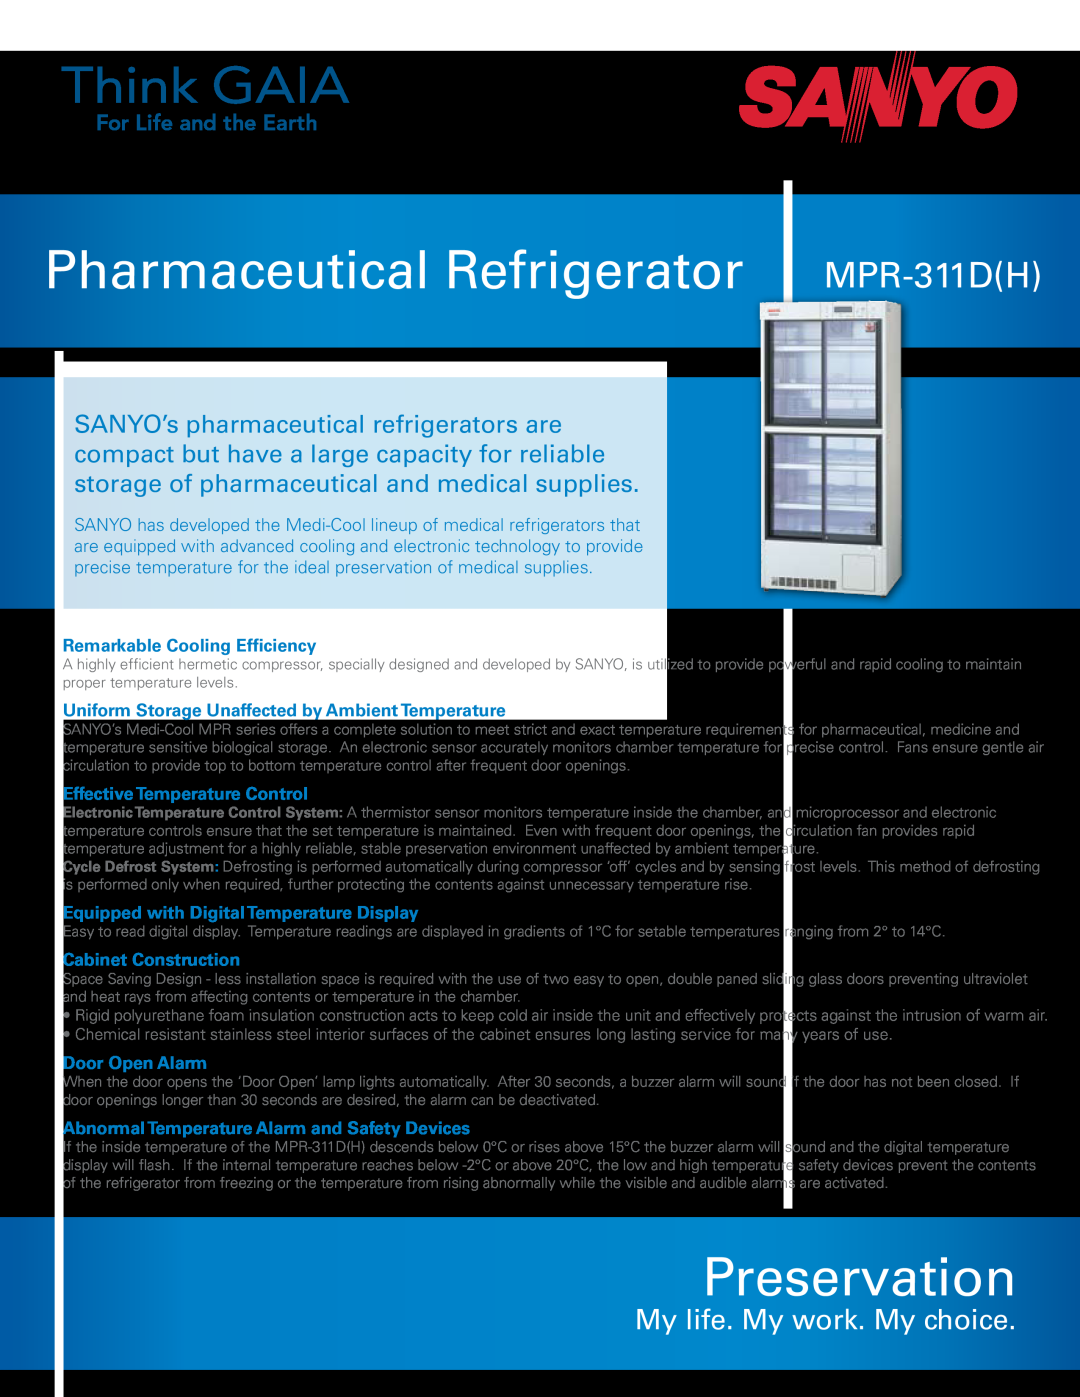 Sanyo MPR-311D(H) manual Pharmaceutical Refrigerator MPR-311DH, Preservation, My life. My work. My choice, Door Open Alarm 